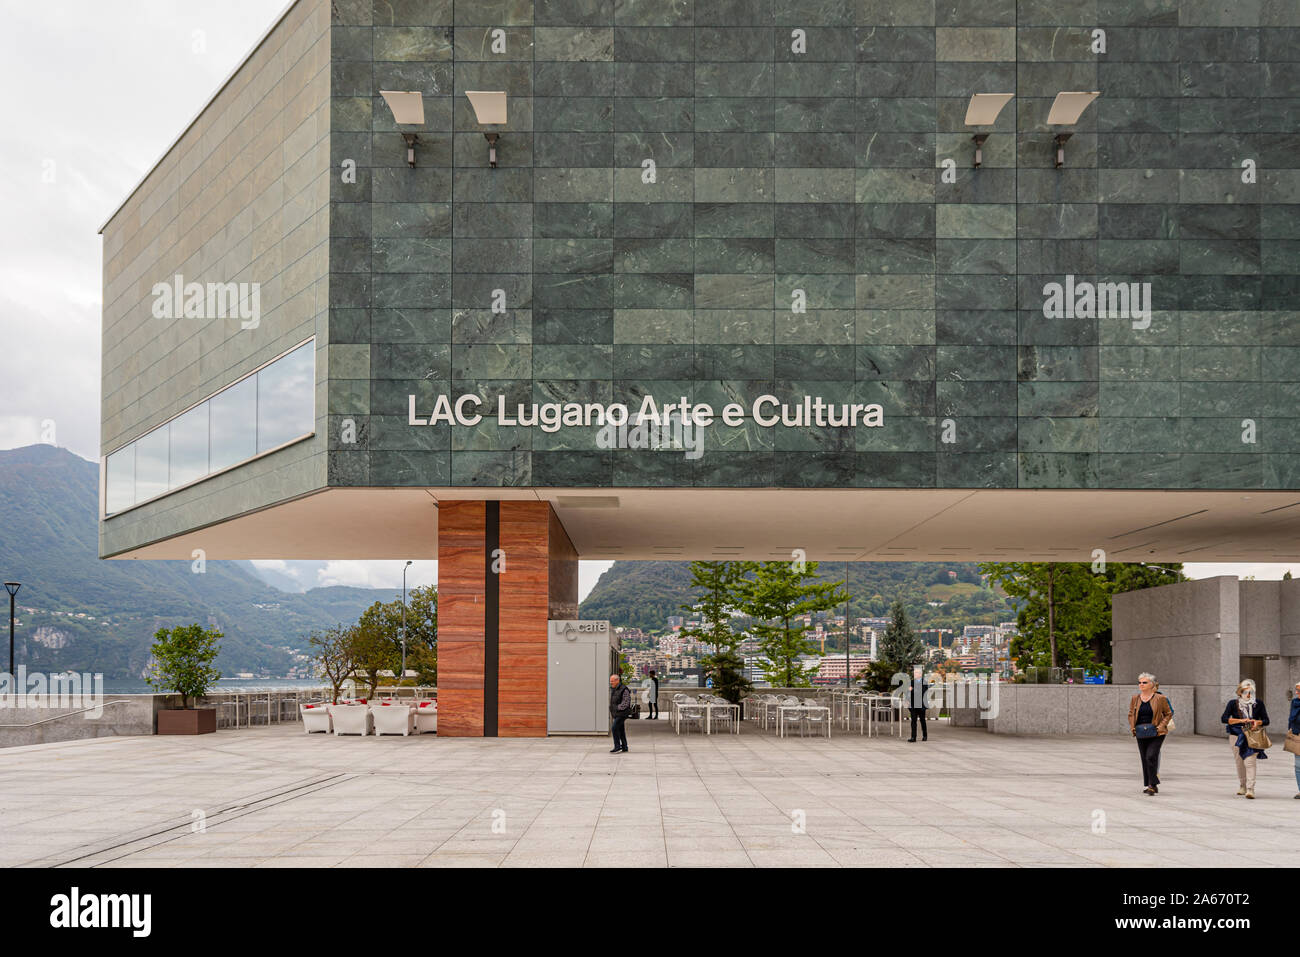 LAC Lugano Arte e Cultura is a new cultural centre dedicated to the visual arts, music and the performing arts, Lugano, Switzerland Stock Photo